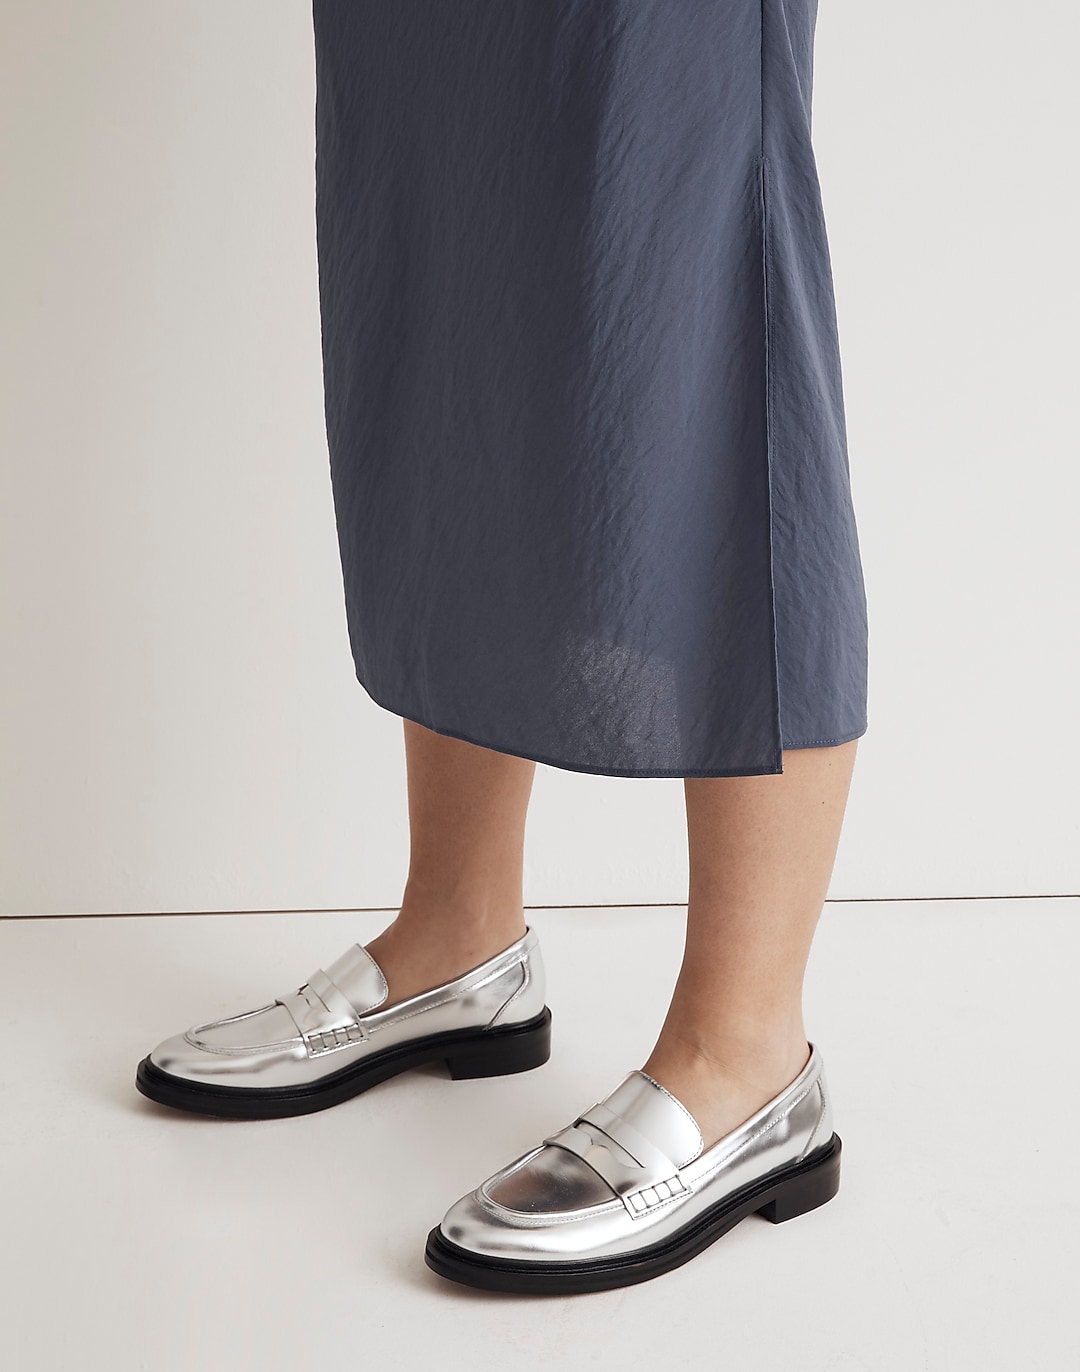 The Vernon Loafer in Specchio Leather | Madewell